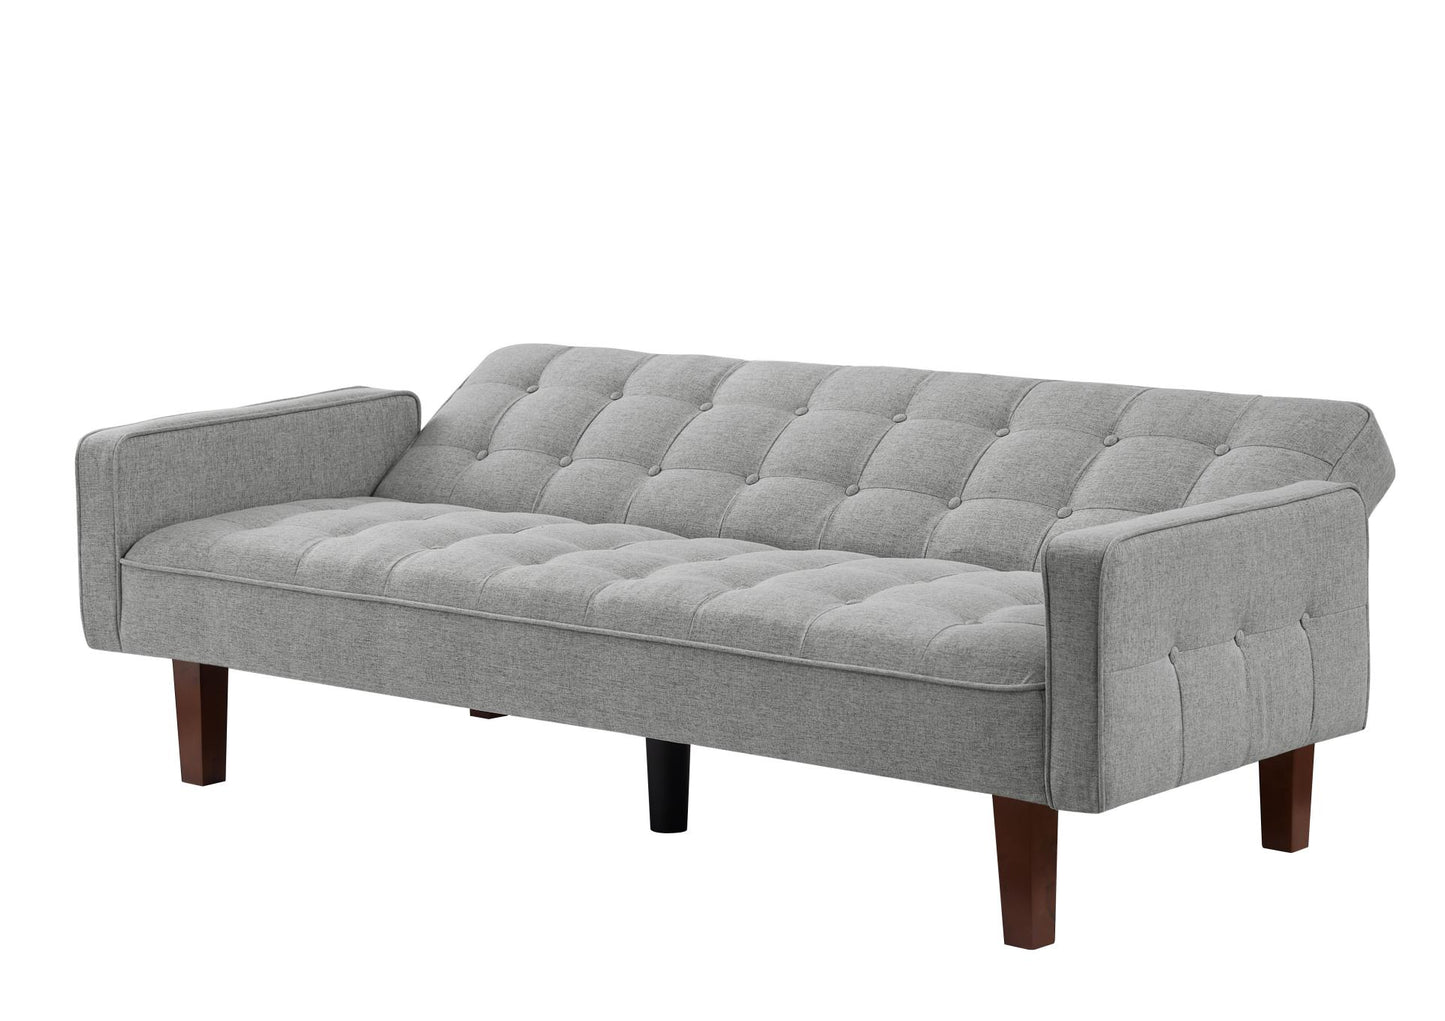 Linen Futon Sofa Bed 73.62 Inch Fabric Upholstered Convertible Sofa Bed, Minimalist Style for Living Room, Bedroom.